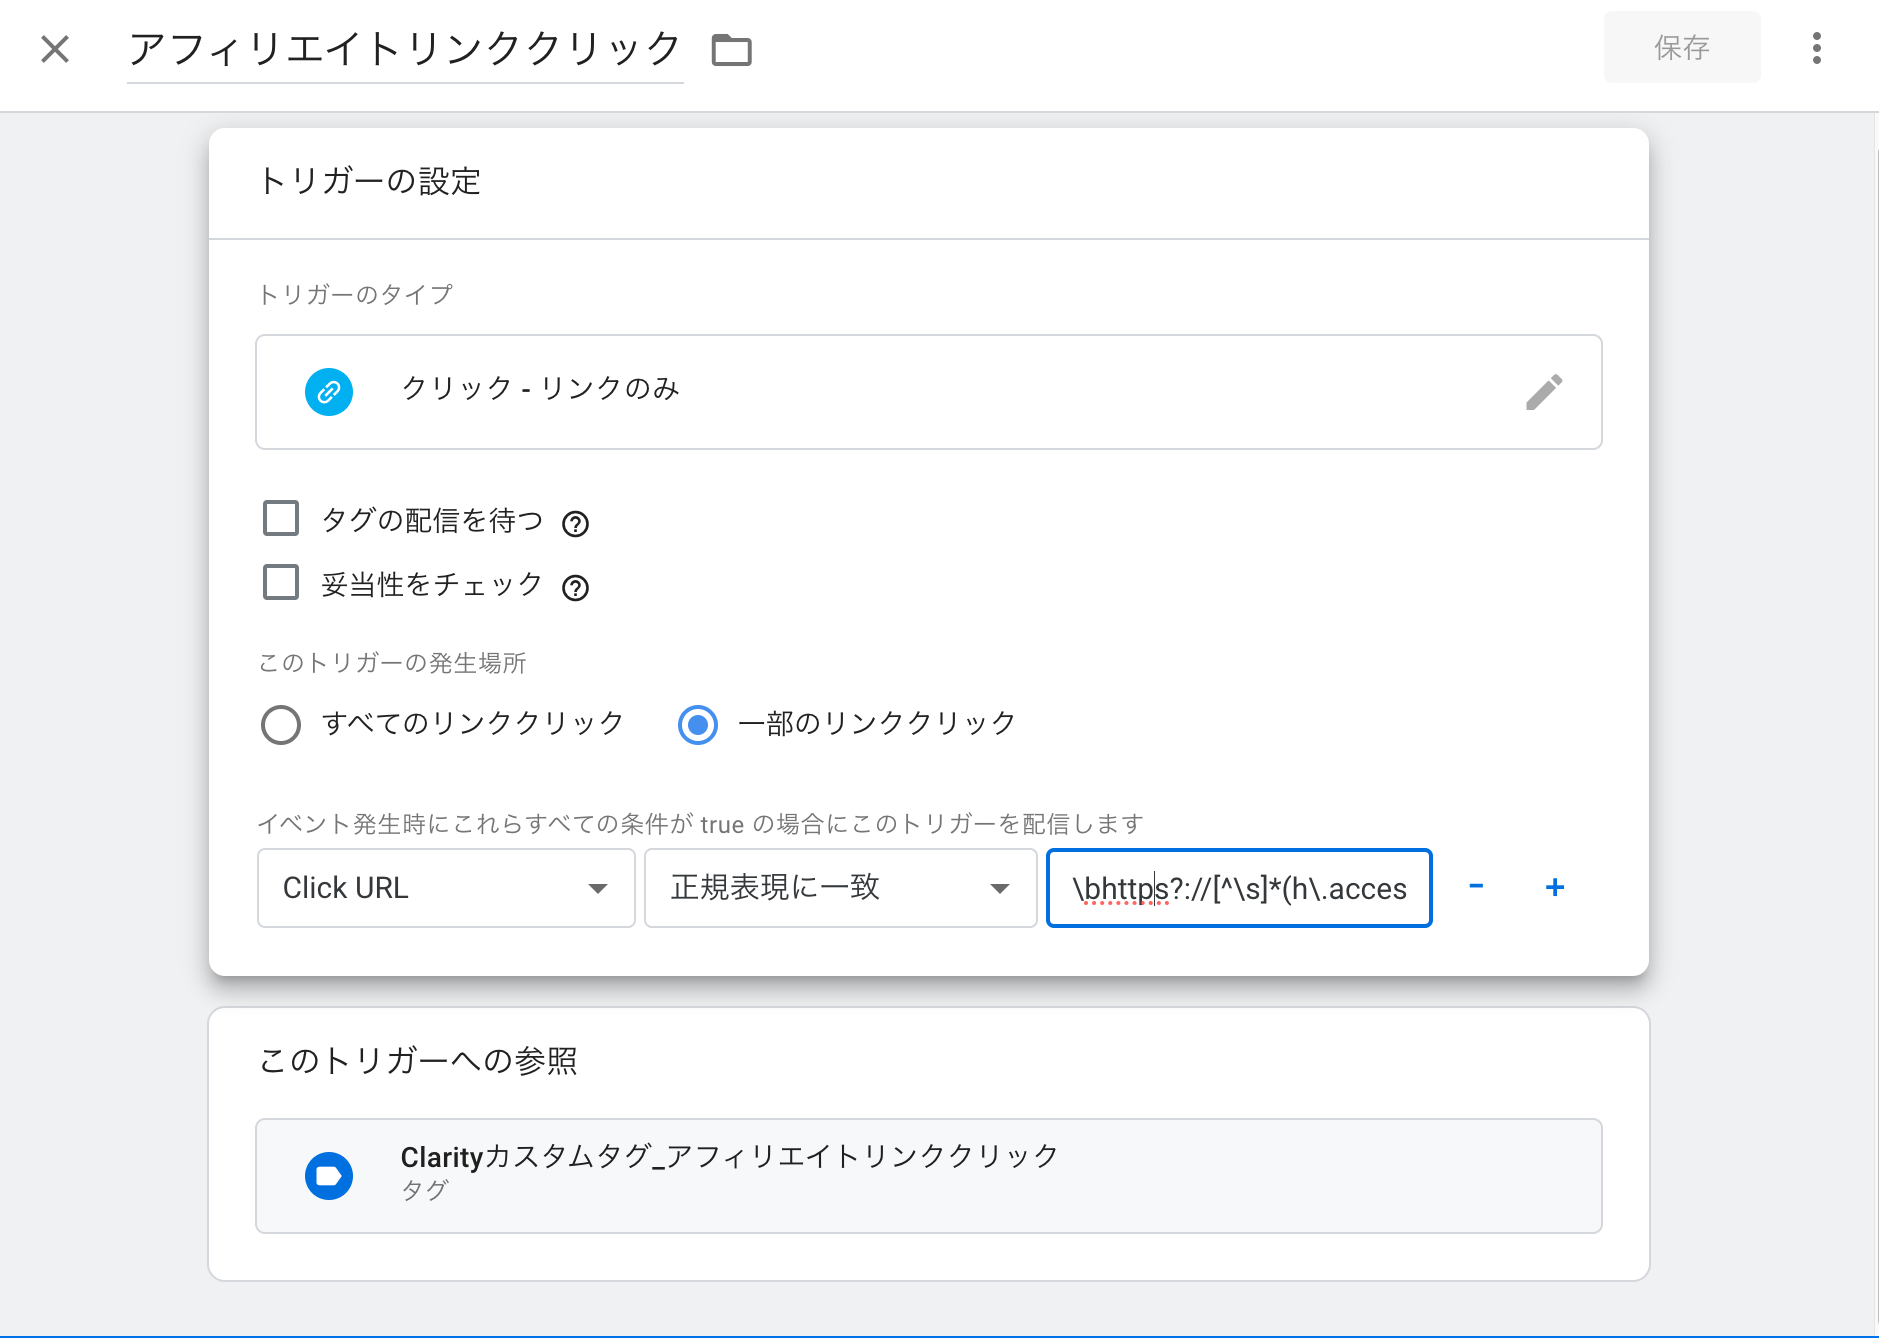 Google Tag Managerで正規表現を利用して、アフィリエイトリンクを指定する方法